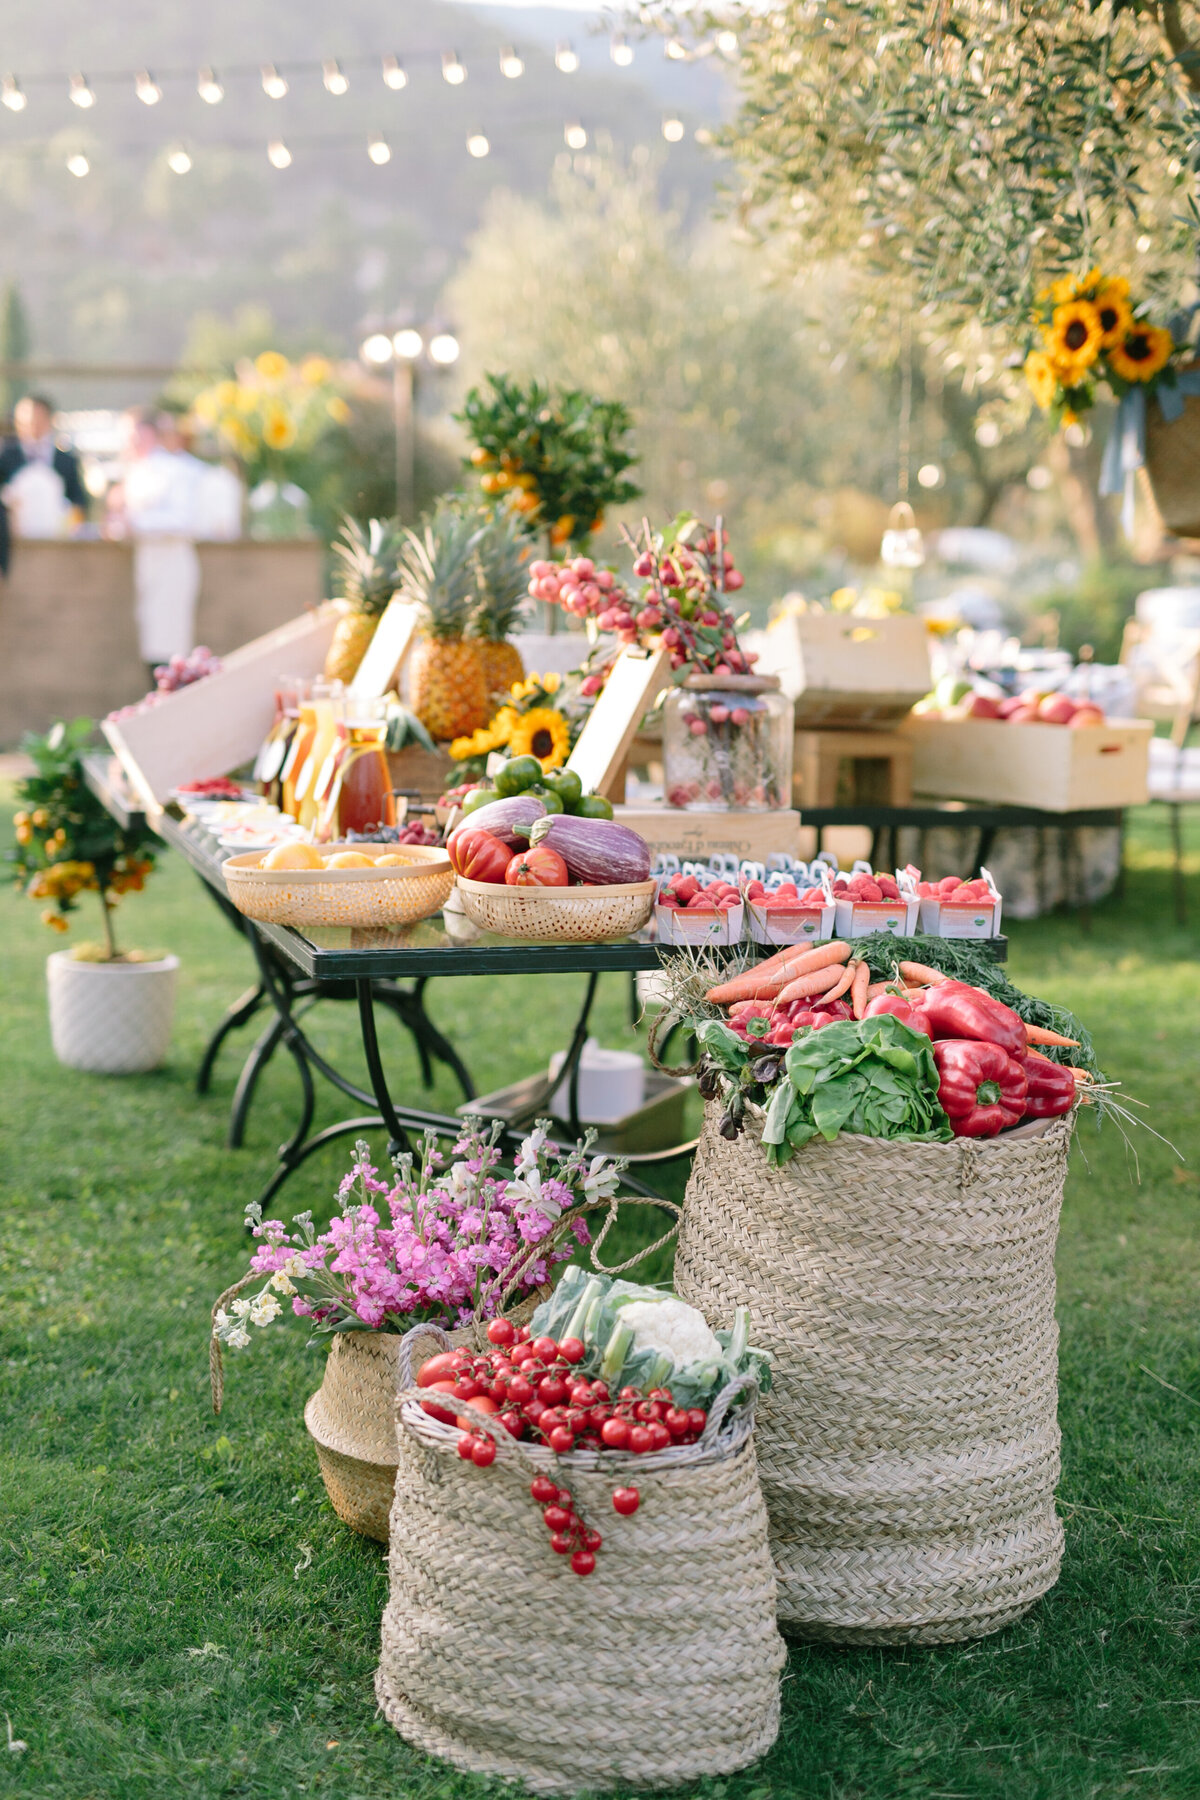 Garden-themed welcome party.